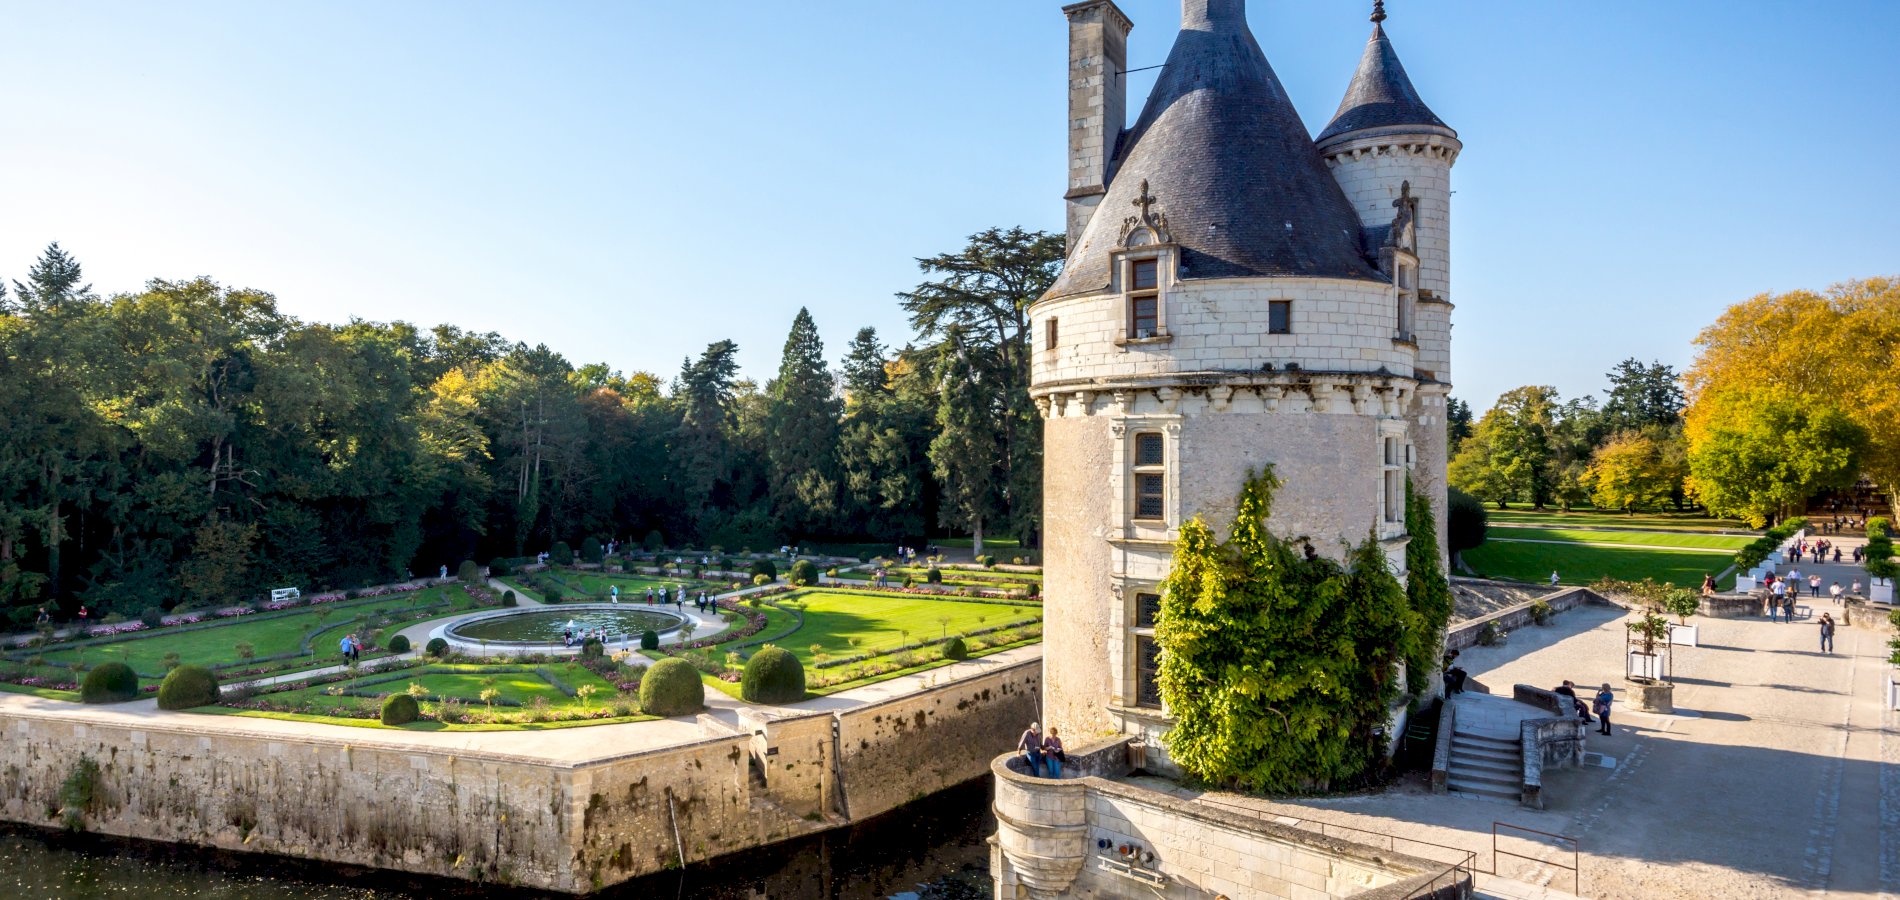 Ophorus Tours - 10 Days Private Normandy, Loire Valley & Bordeaux Travel Package - 3* Hotel